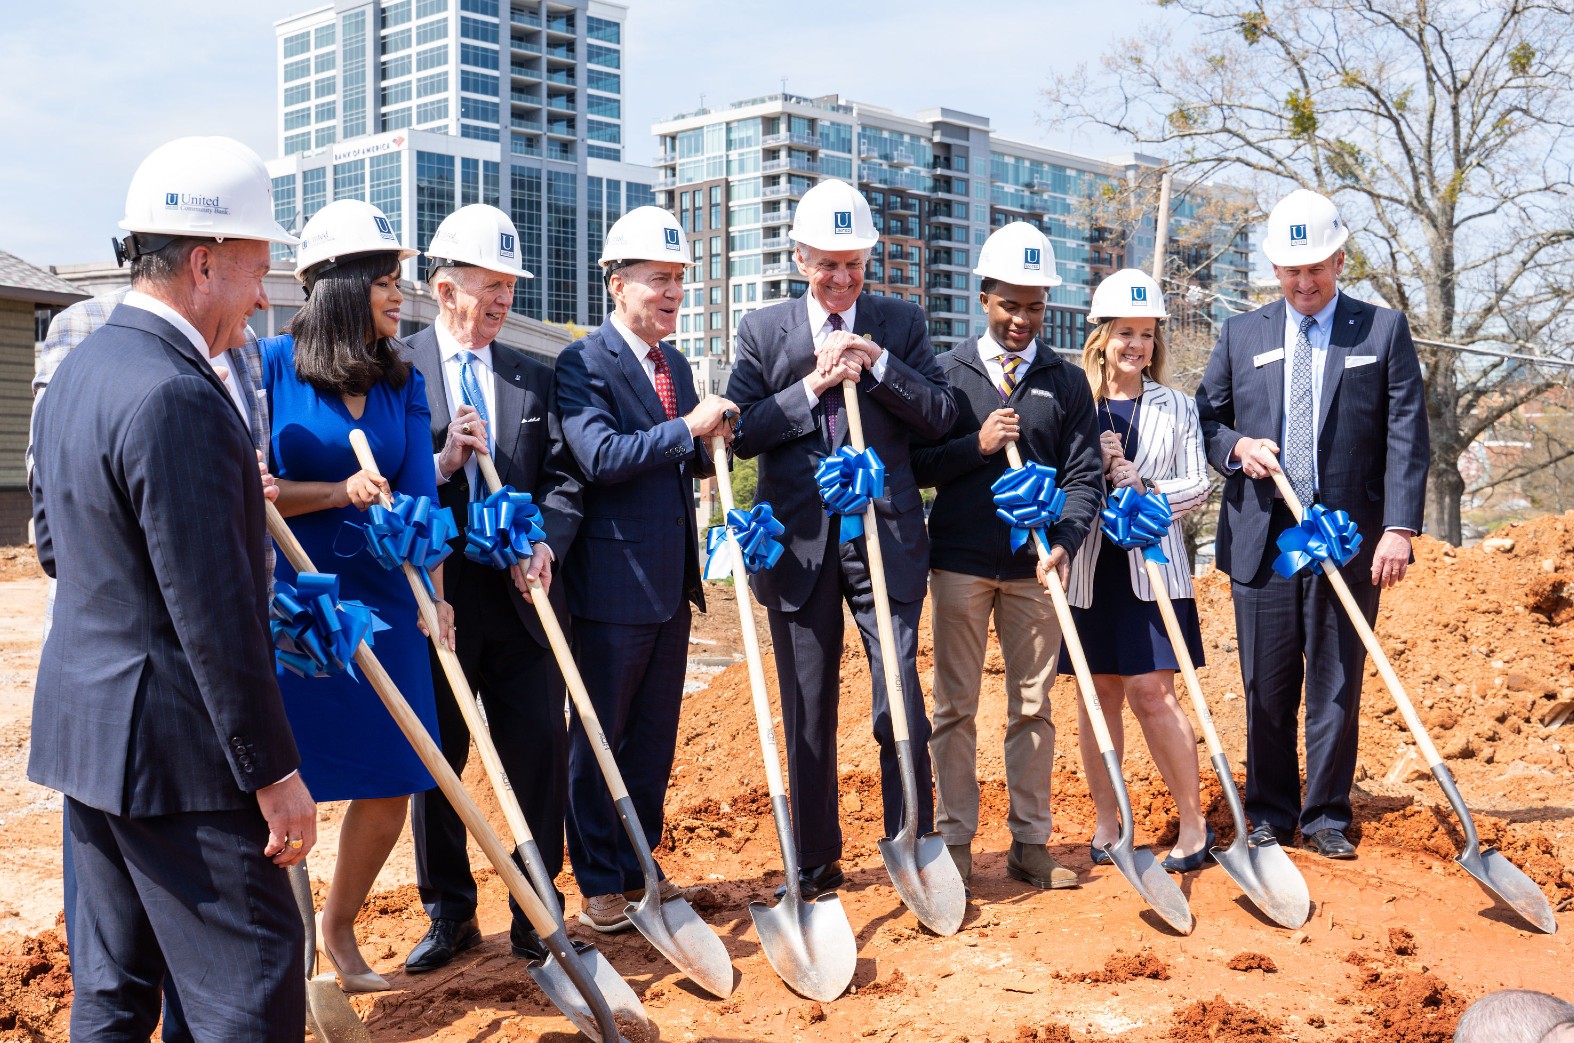 Bank executives and government officials break ground on the 200 E. Camperdown Way headquarters. (Photo/Provided)